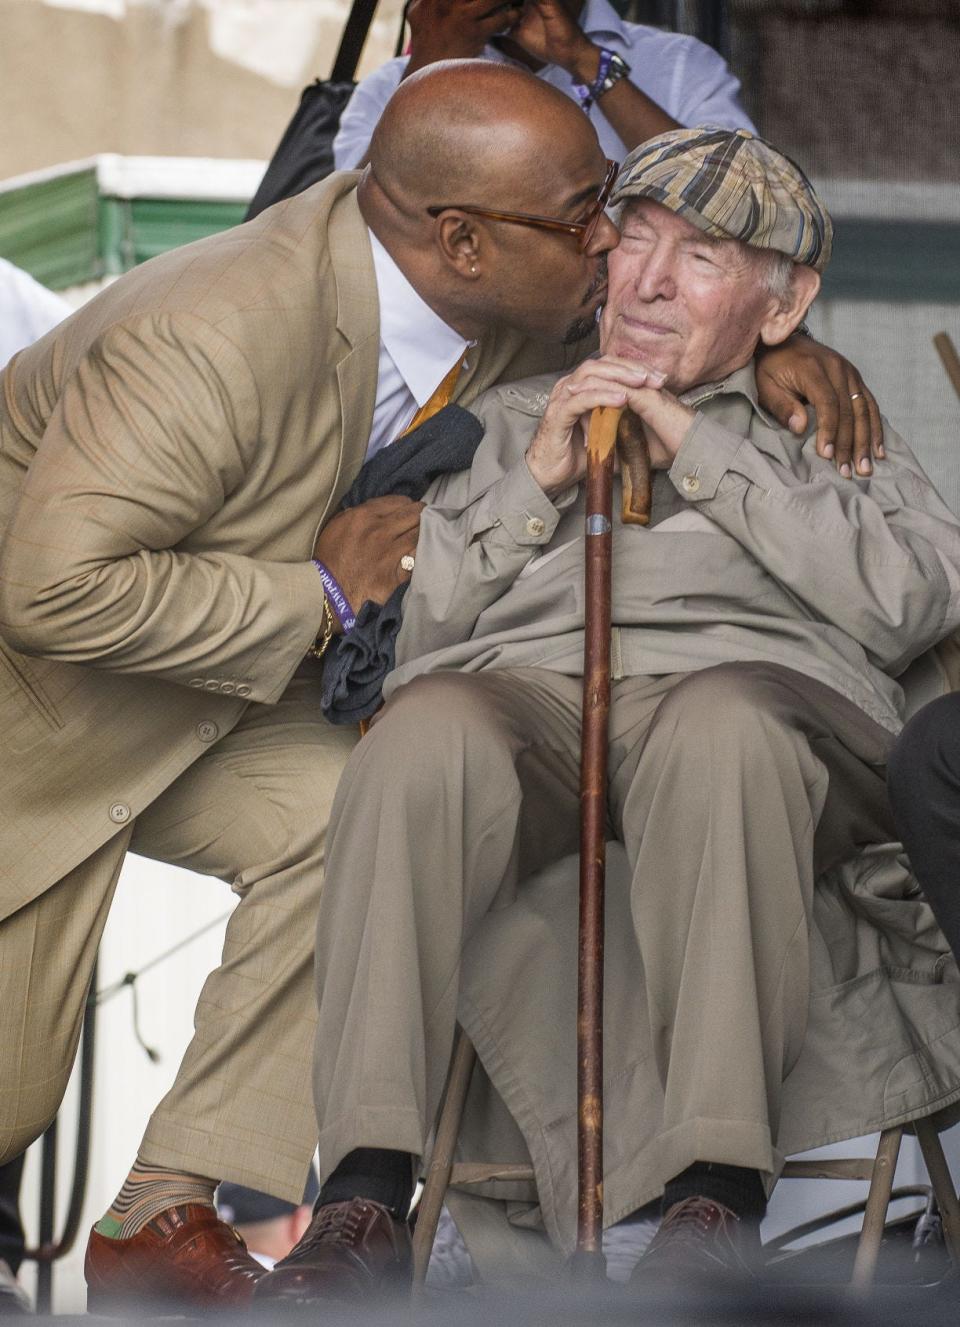 Newport Jazz Festival artistic director Christian McBride gives George Wein a kiss as McBride takes the stage to perform with his big band in 2017.